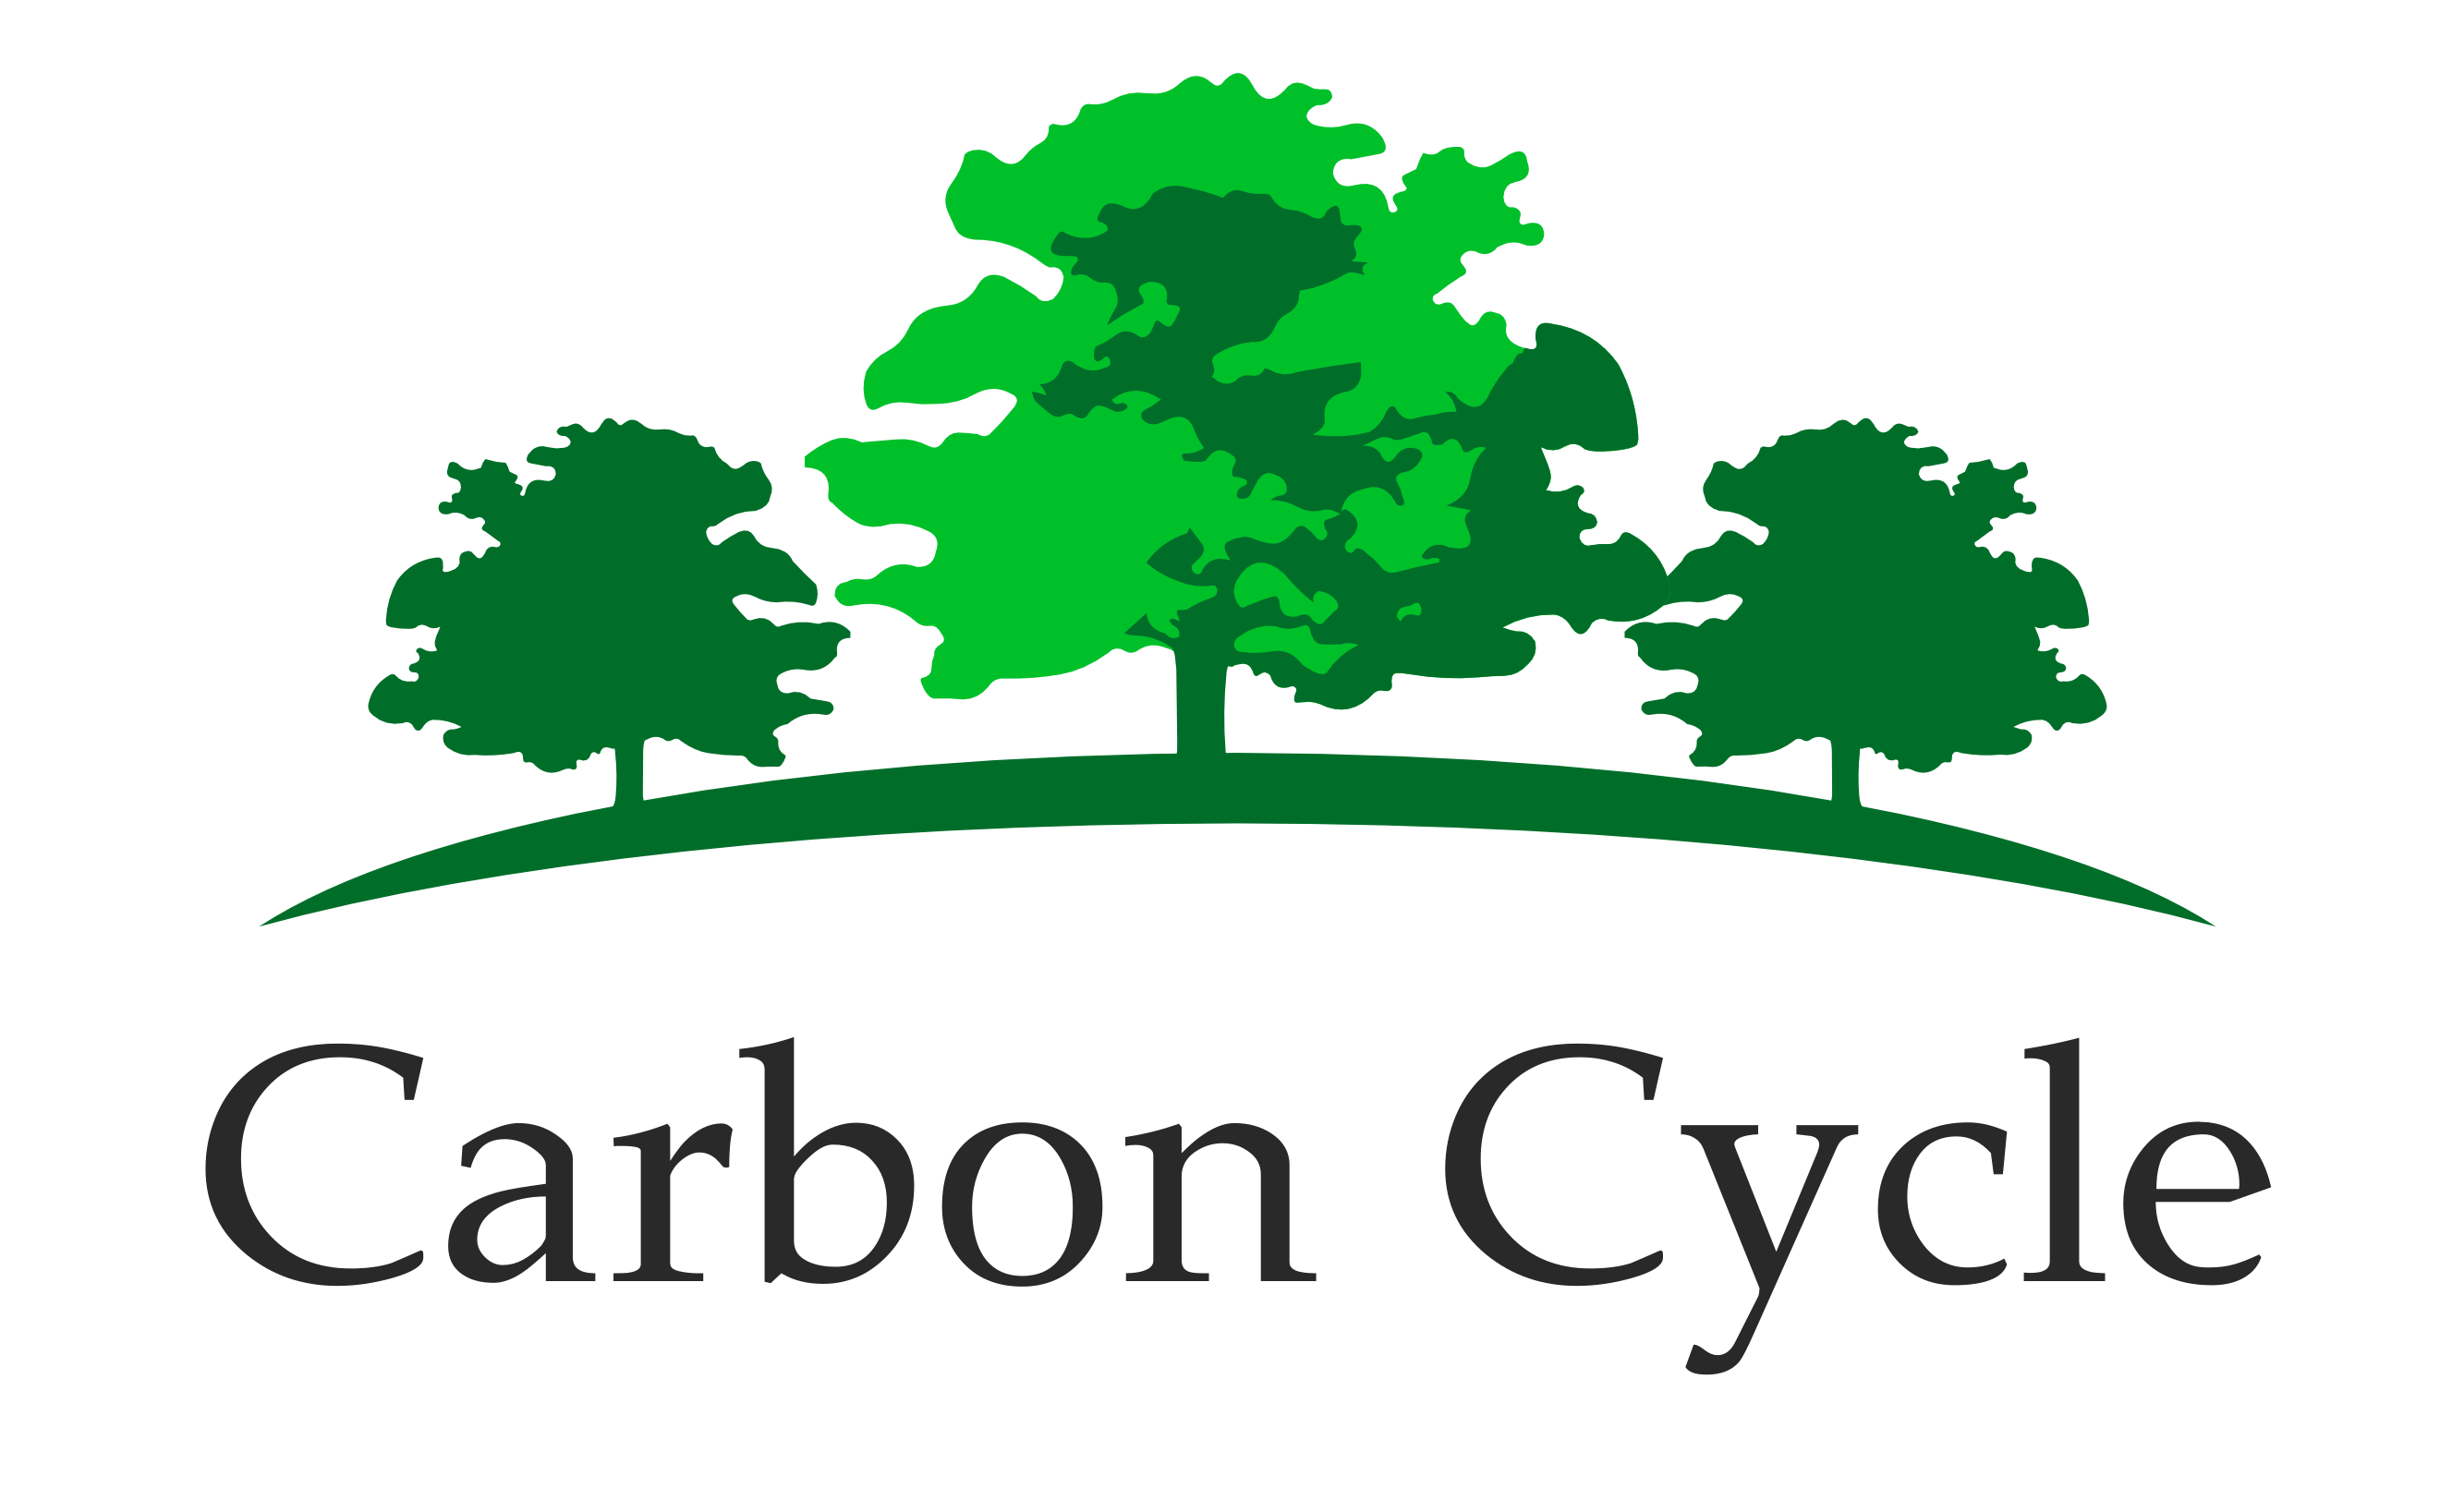 CARBON CYCLE GmbH & Co. KG